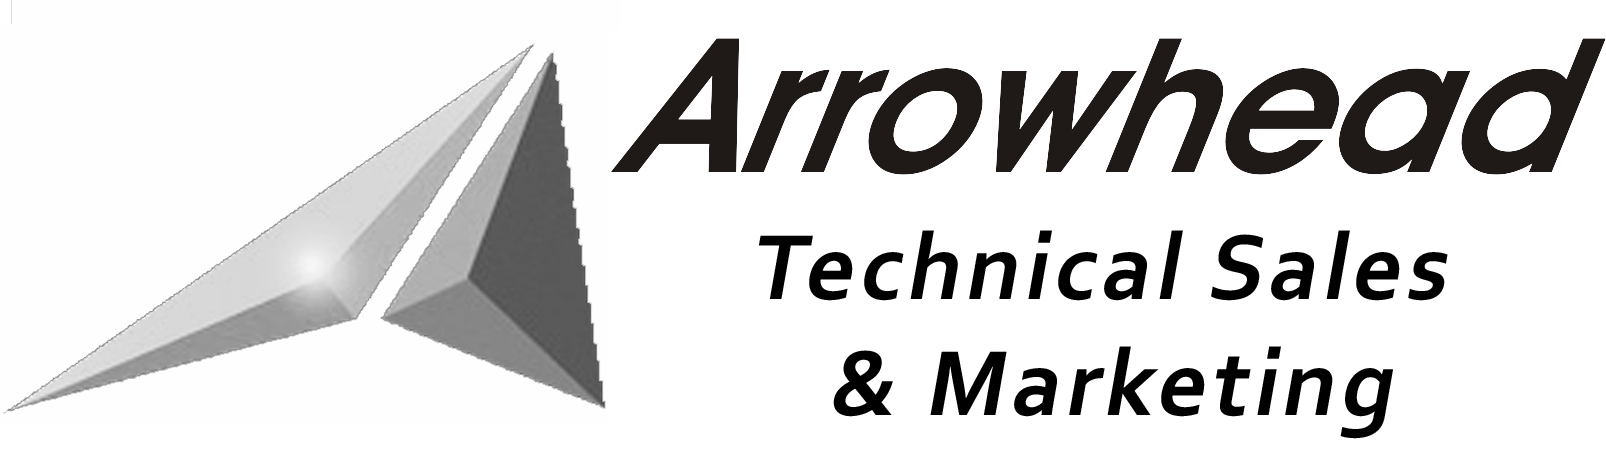 Arrowhead Technical Sales & Marketing LLC - Test Probes - Spring Contacts - Test Fixtures - Test Sockets